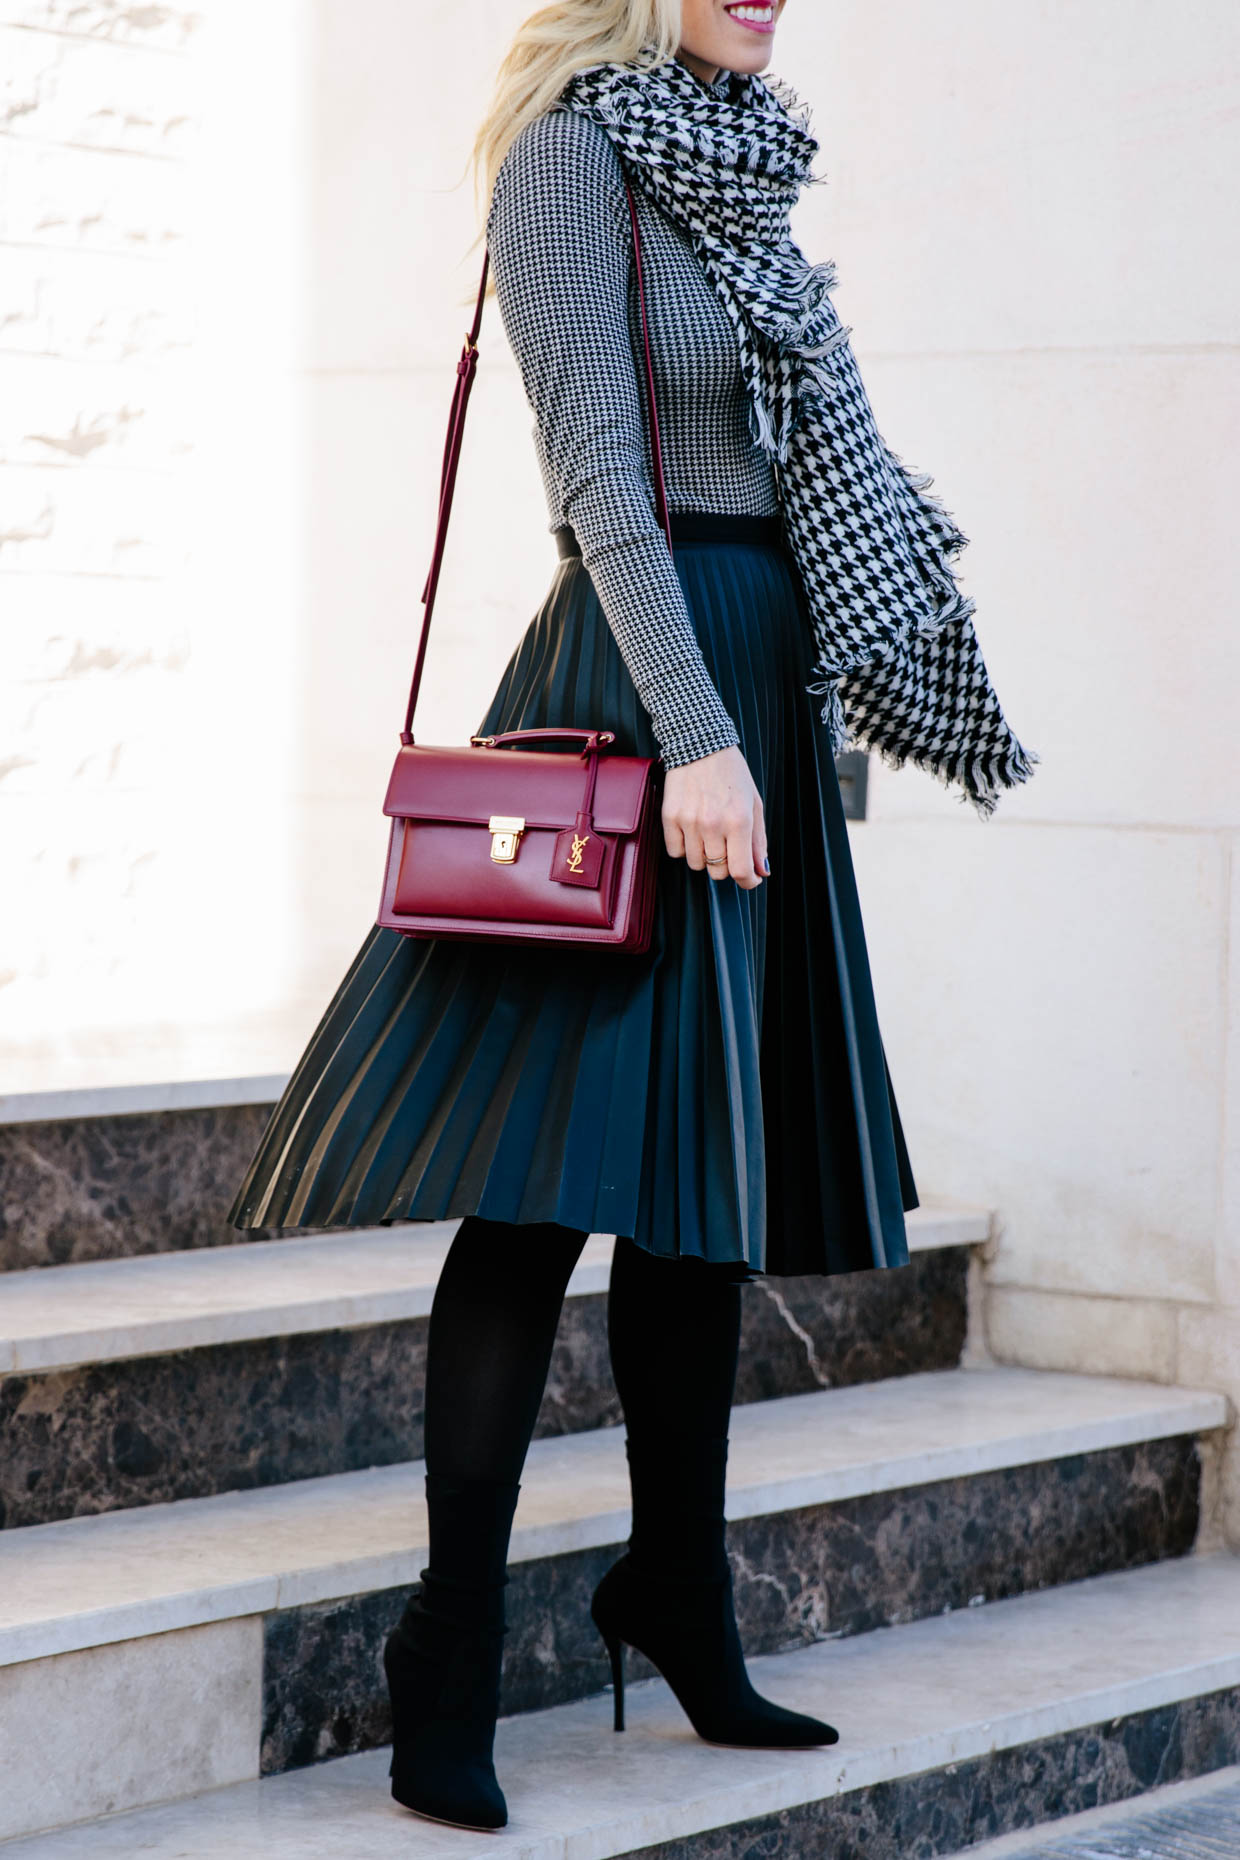 Mixing Houndstooth Prints for the Holidays - Meagan's Moda